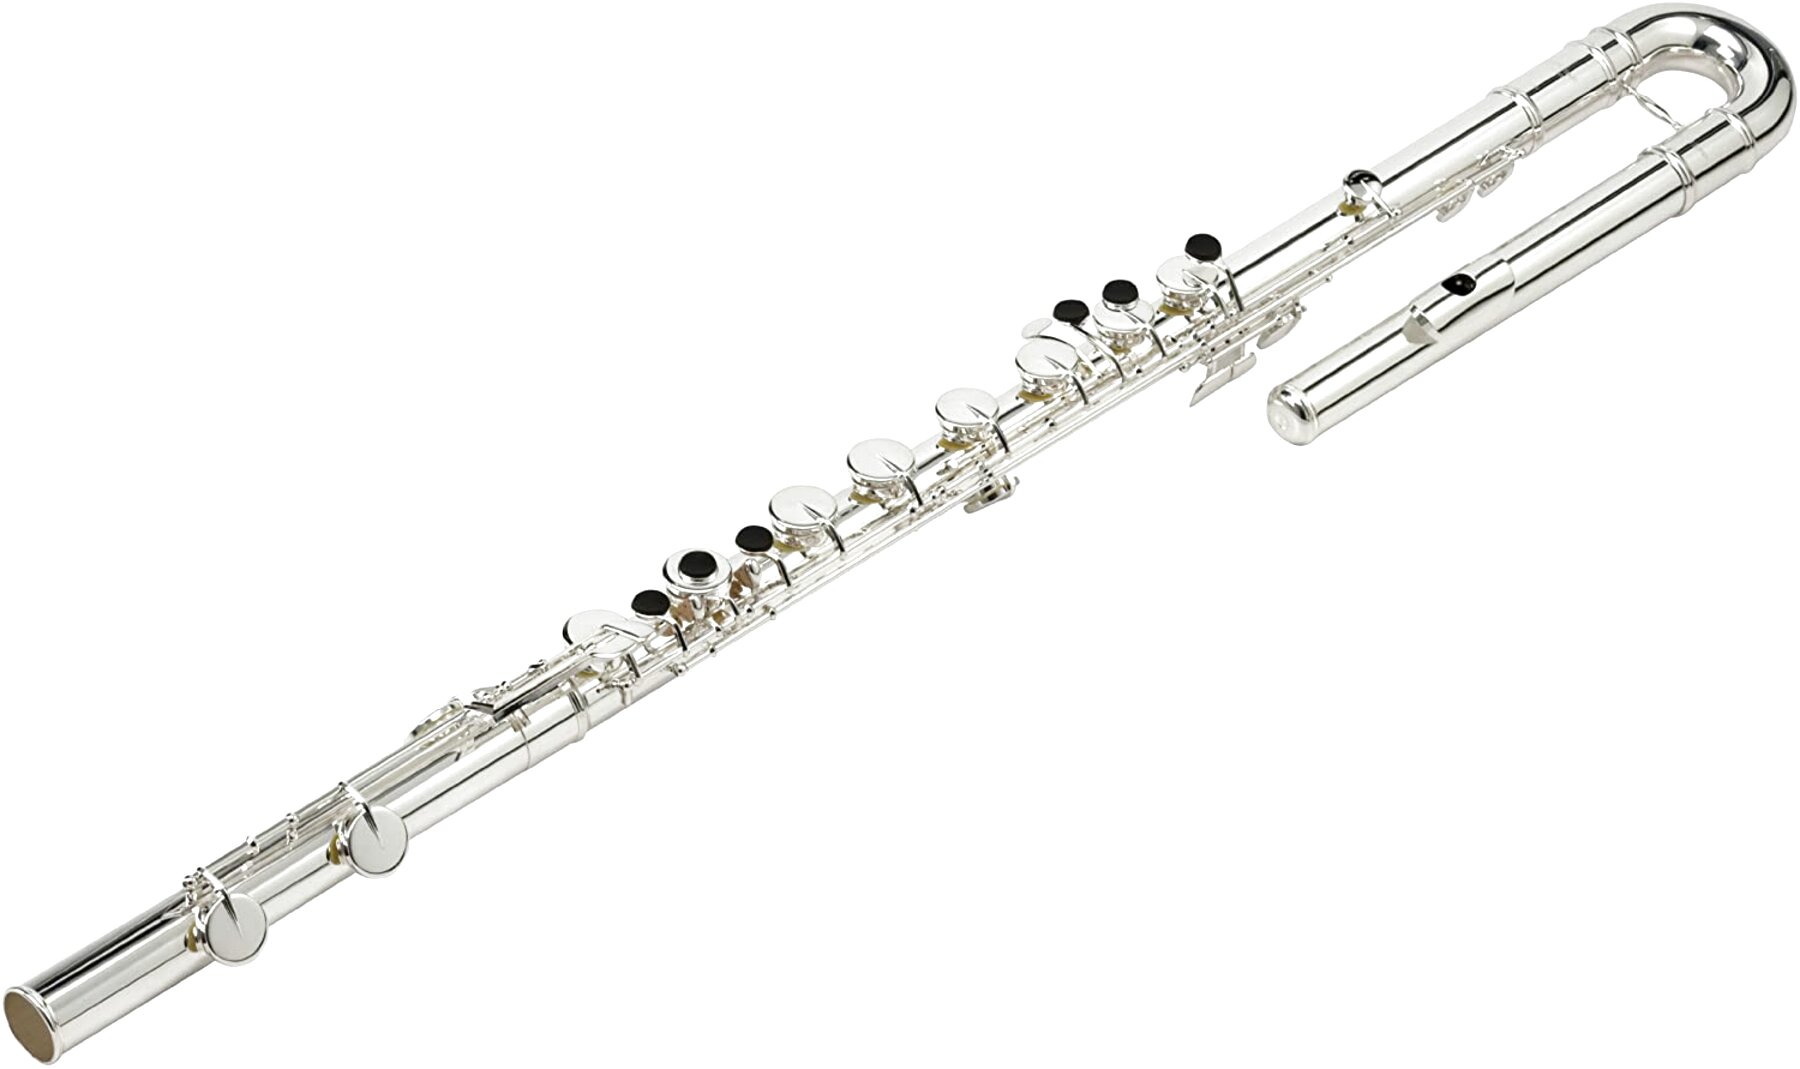 Bass Flute for sale in UK | 59 used Bass Flutes